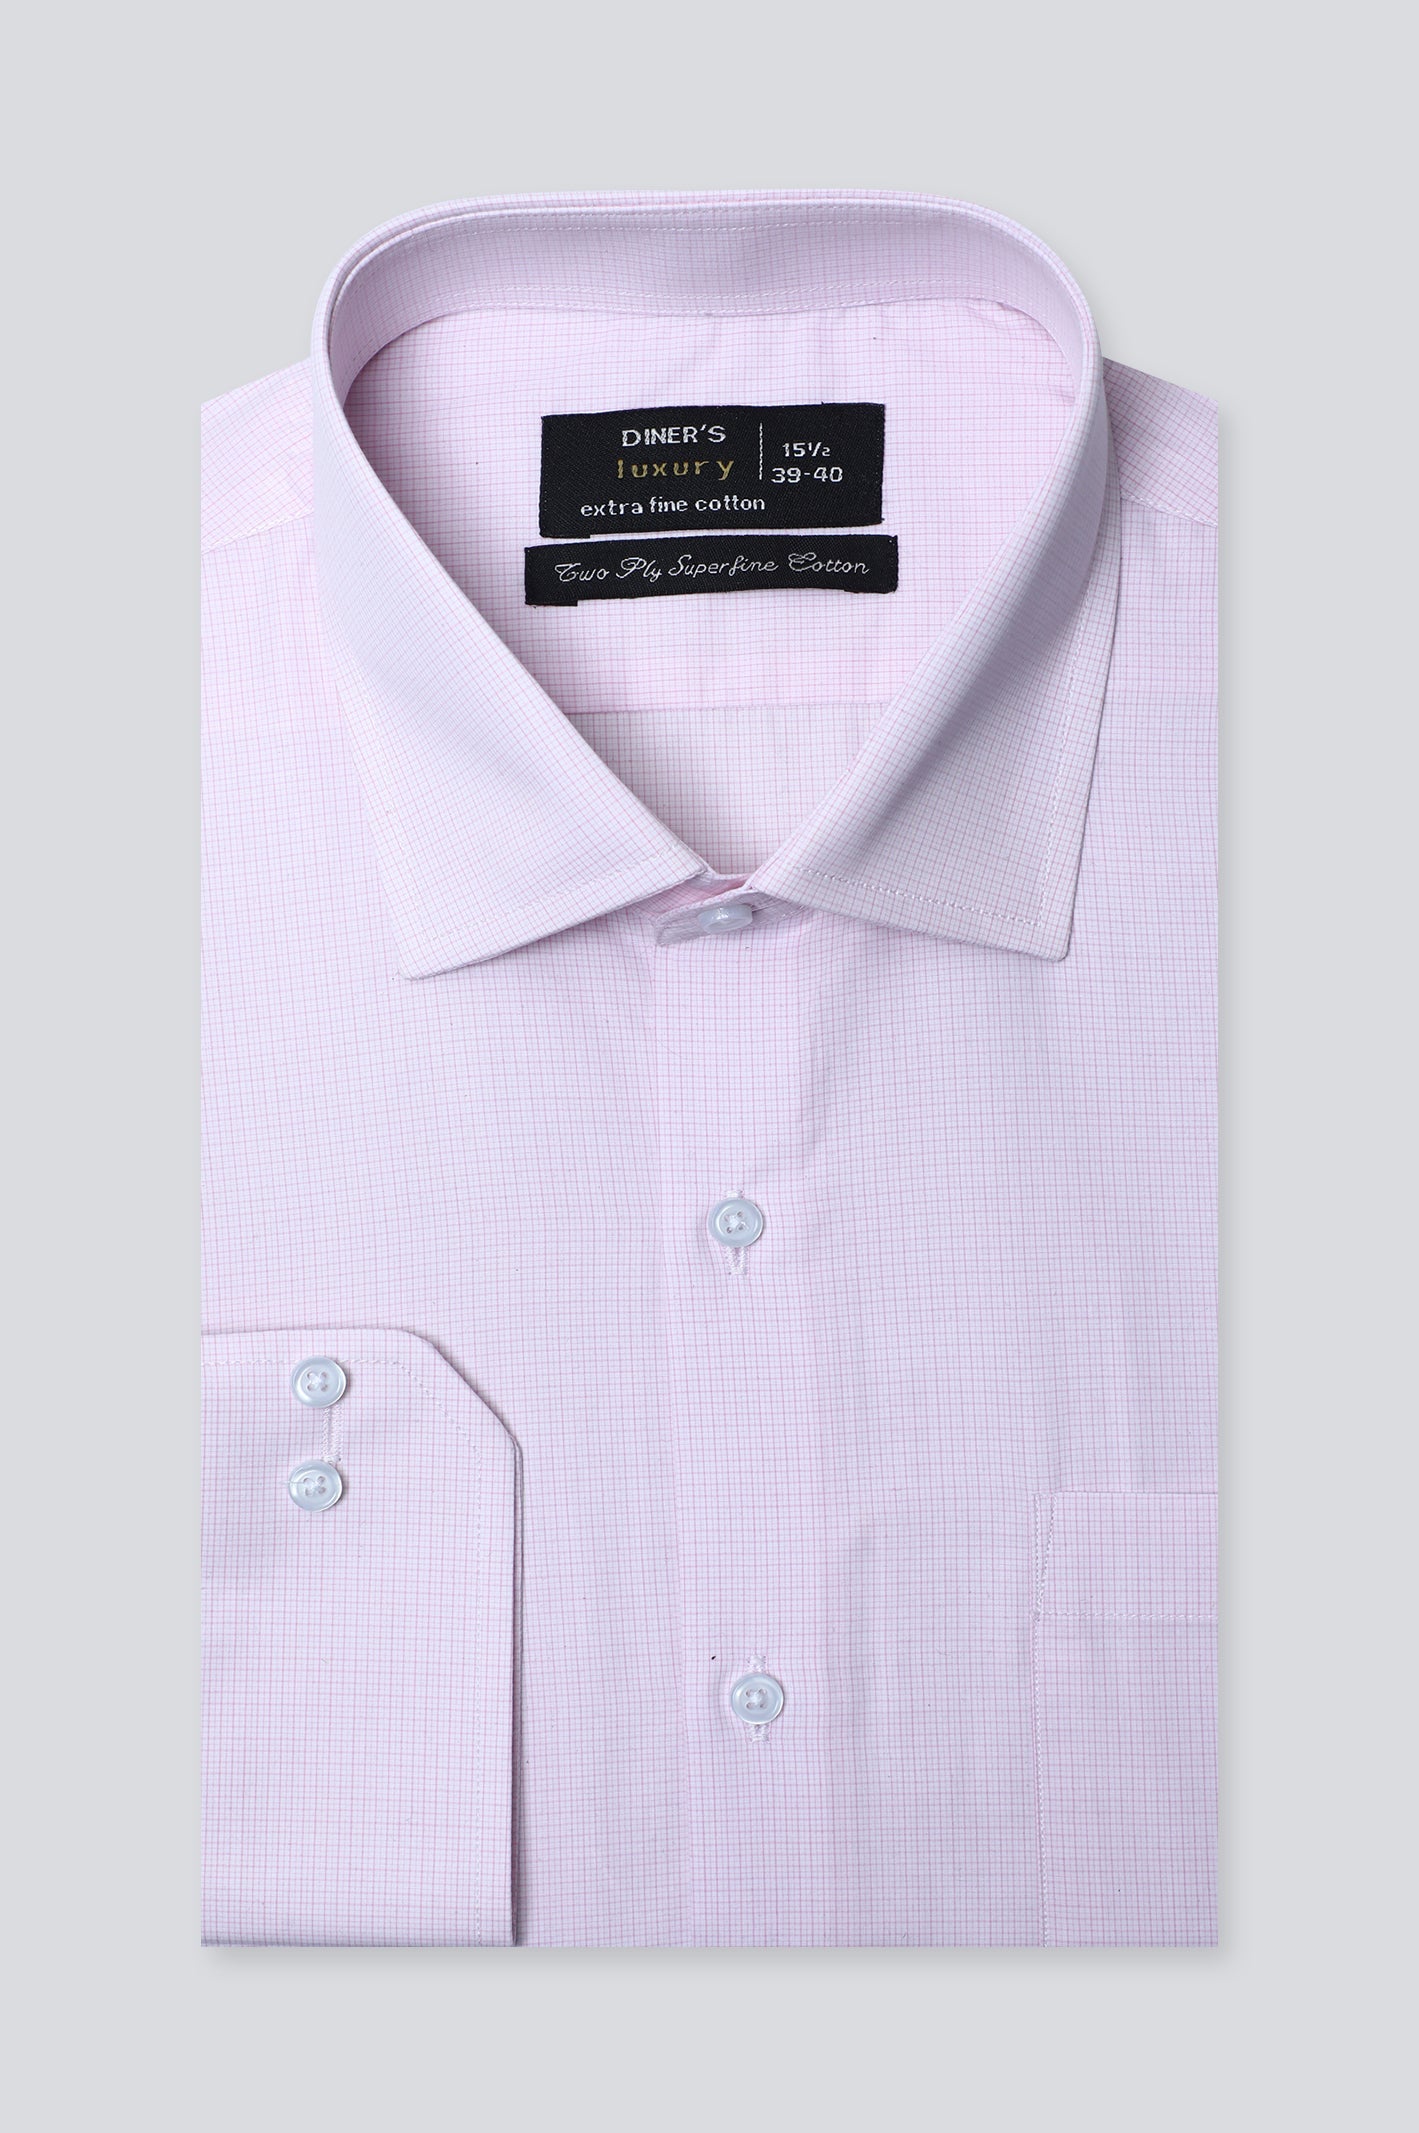 Pink Pin Check Formal Shirt For Men - Diners